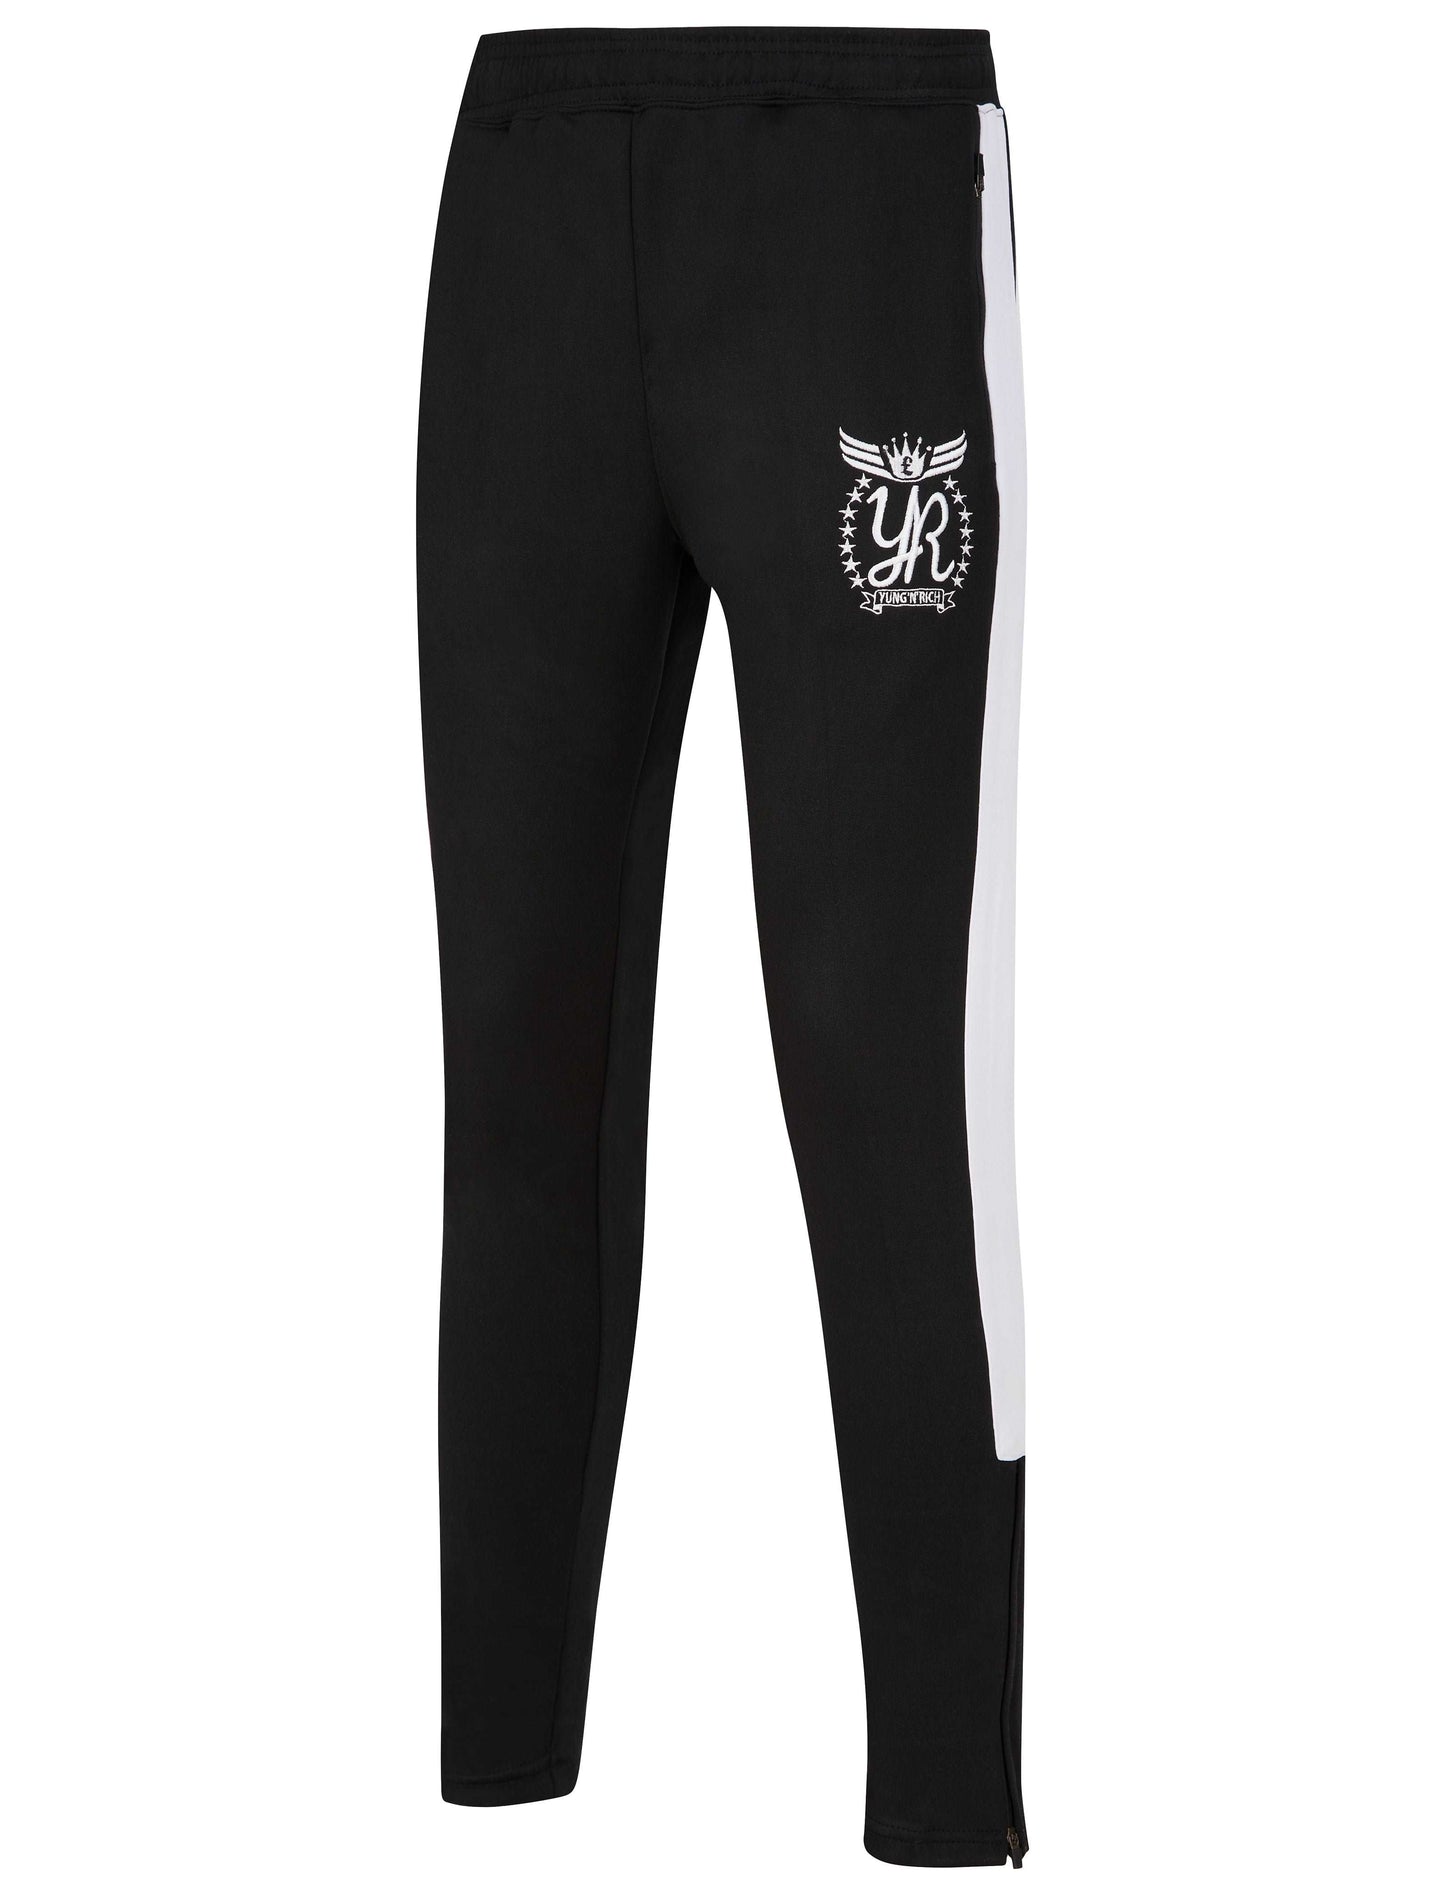 YUNGNRICH WOMENS FUNNEL NECK CONTRAST PANEL TRACKSUIT BOTTOMS BLACK & WHITE